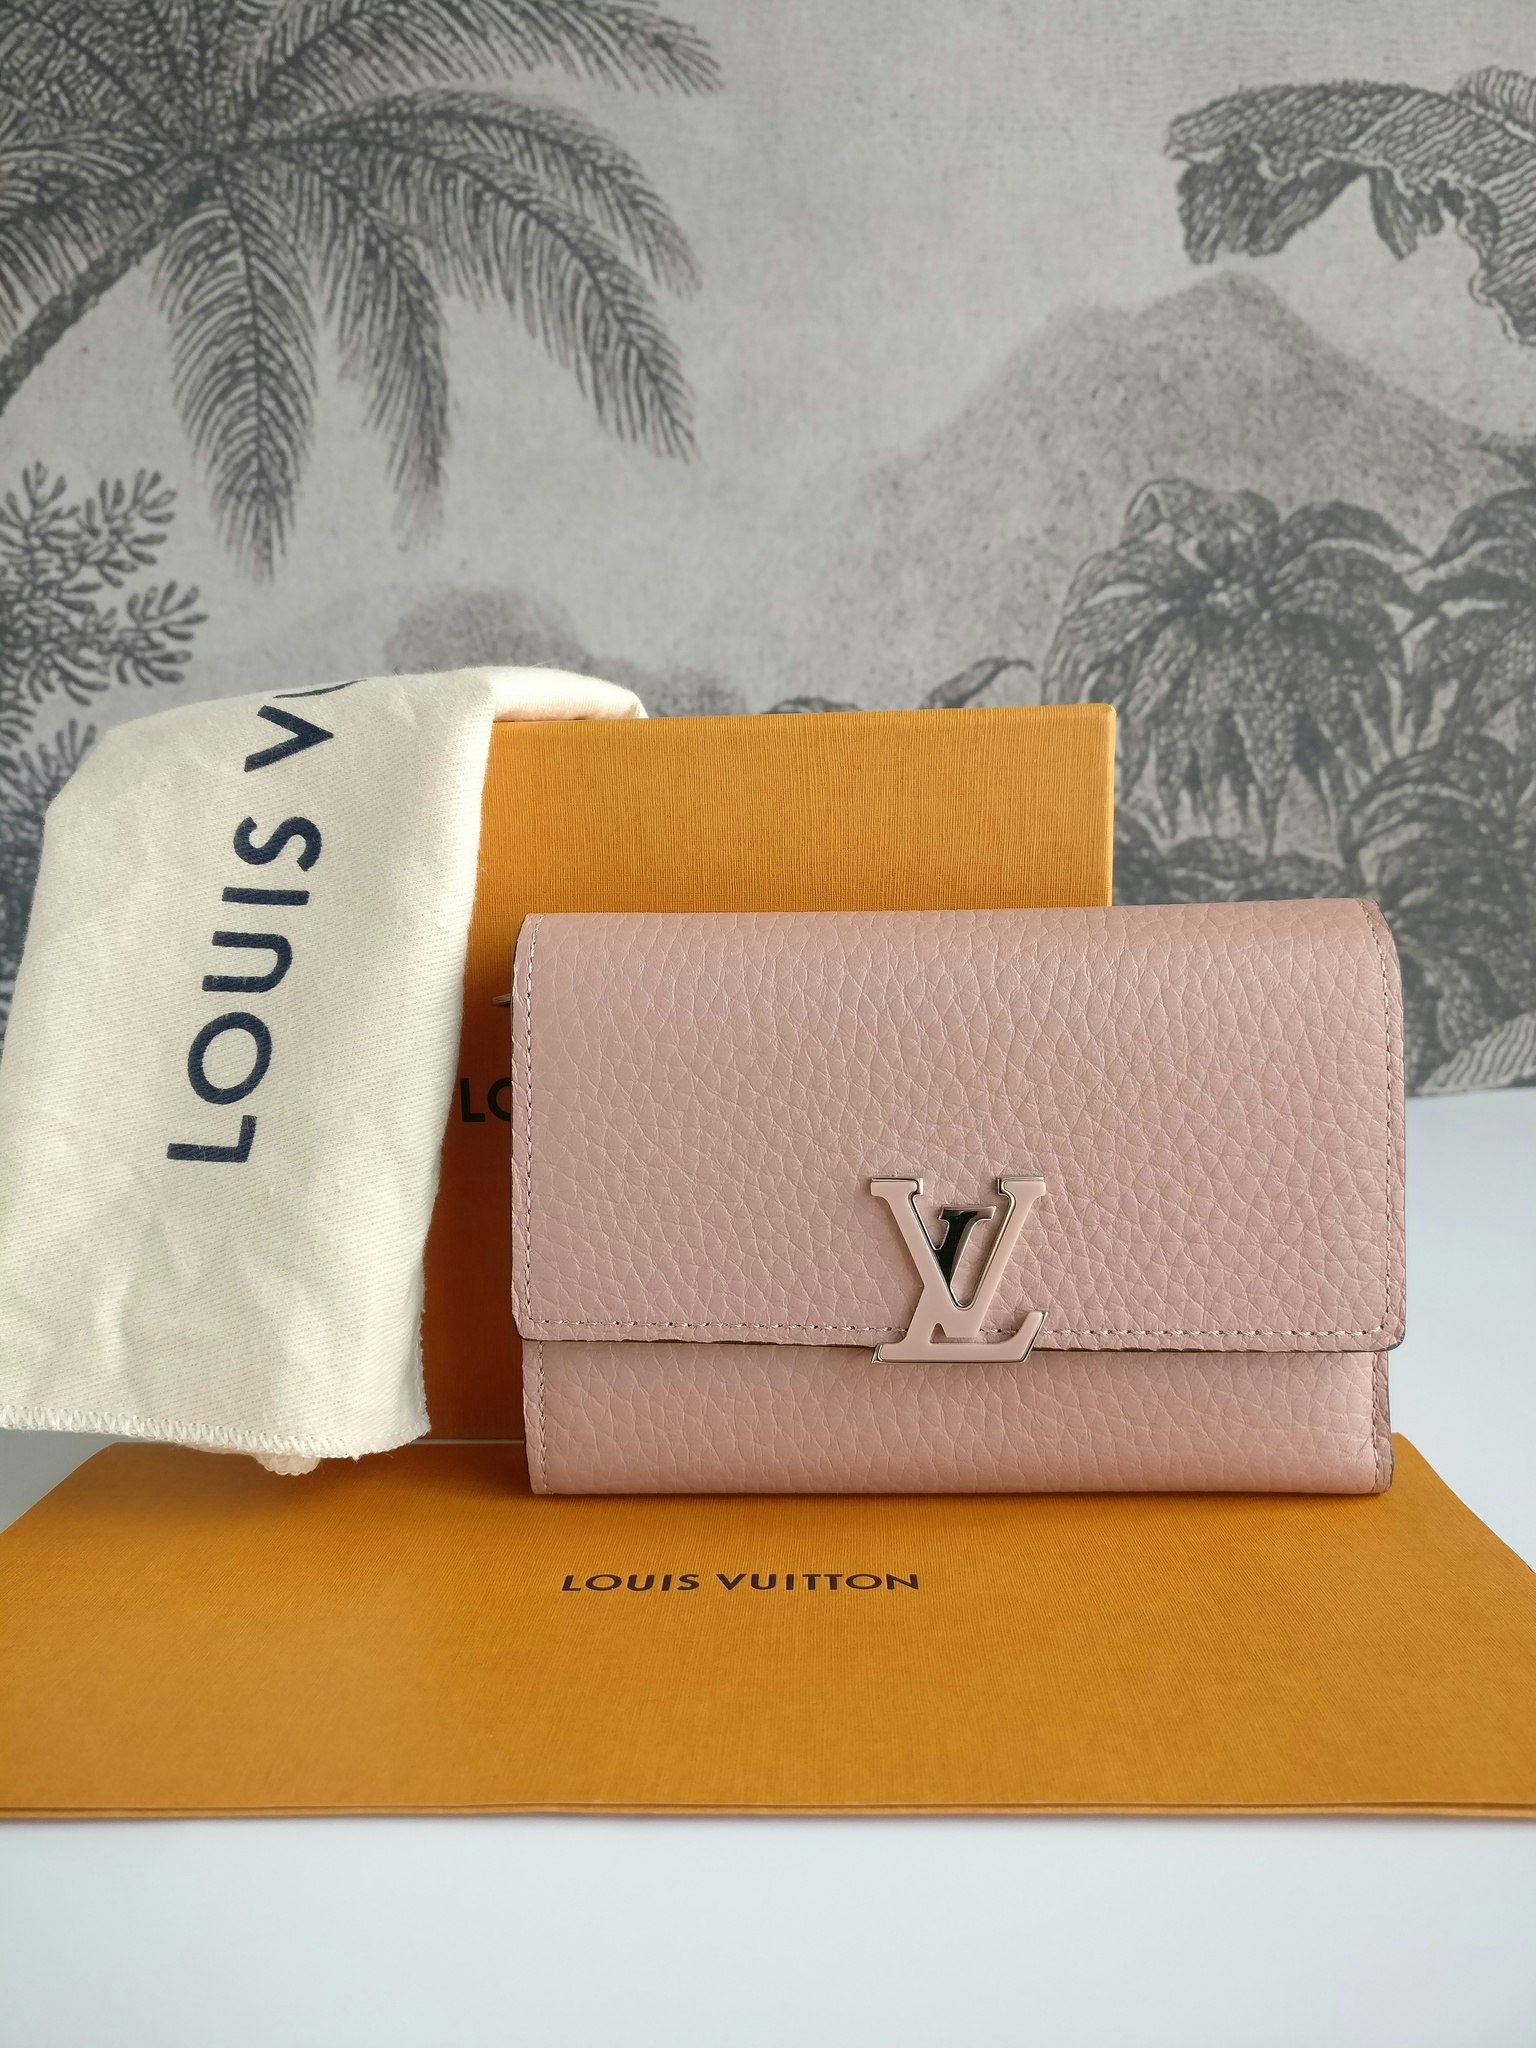 Naughtipidgins Nest - Louis Vuitton Capucines Compact Wallet in Magnolia  Pink Taurillon Leather. RRP £560 >   Capucines-Compact-Wallet-in-Magnolia-Pink-Taurillon-Leather.html